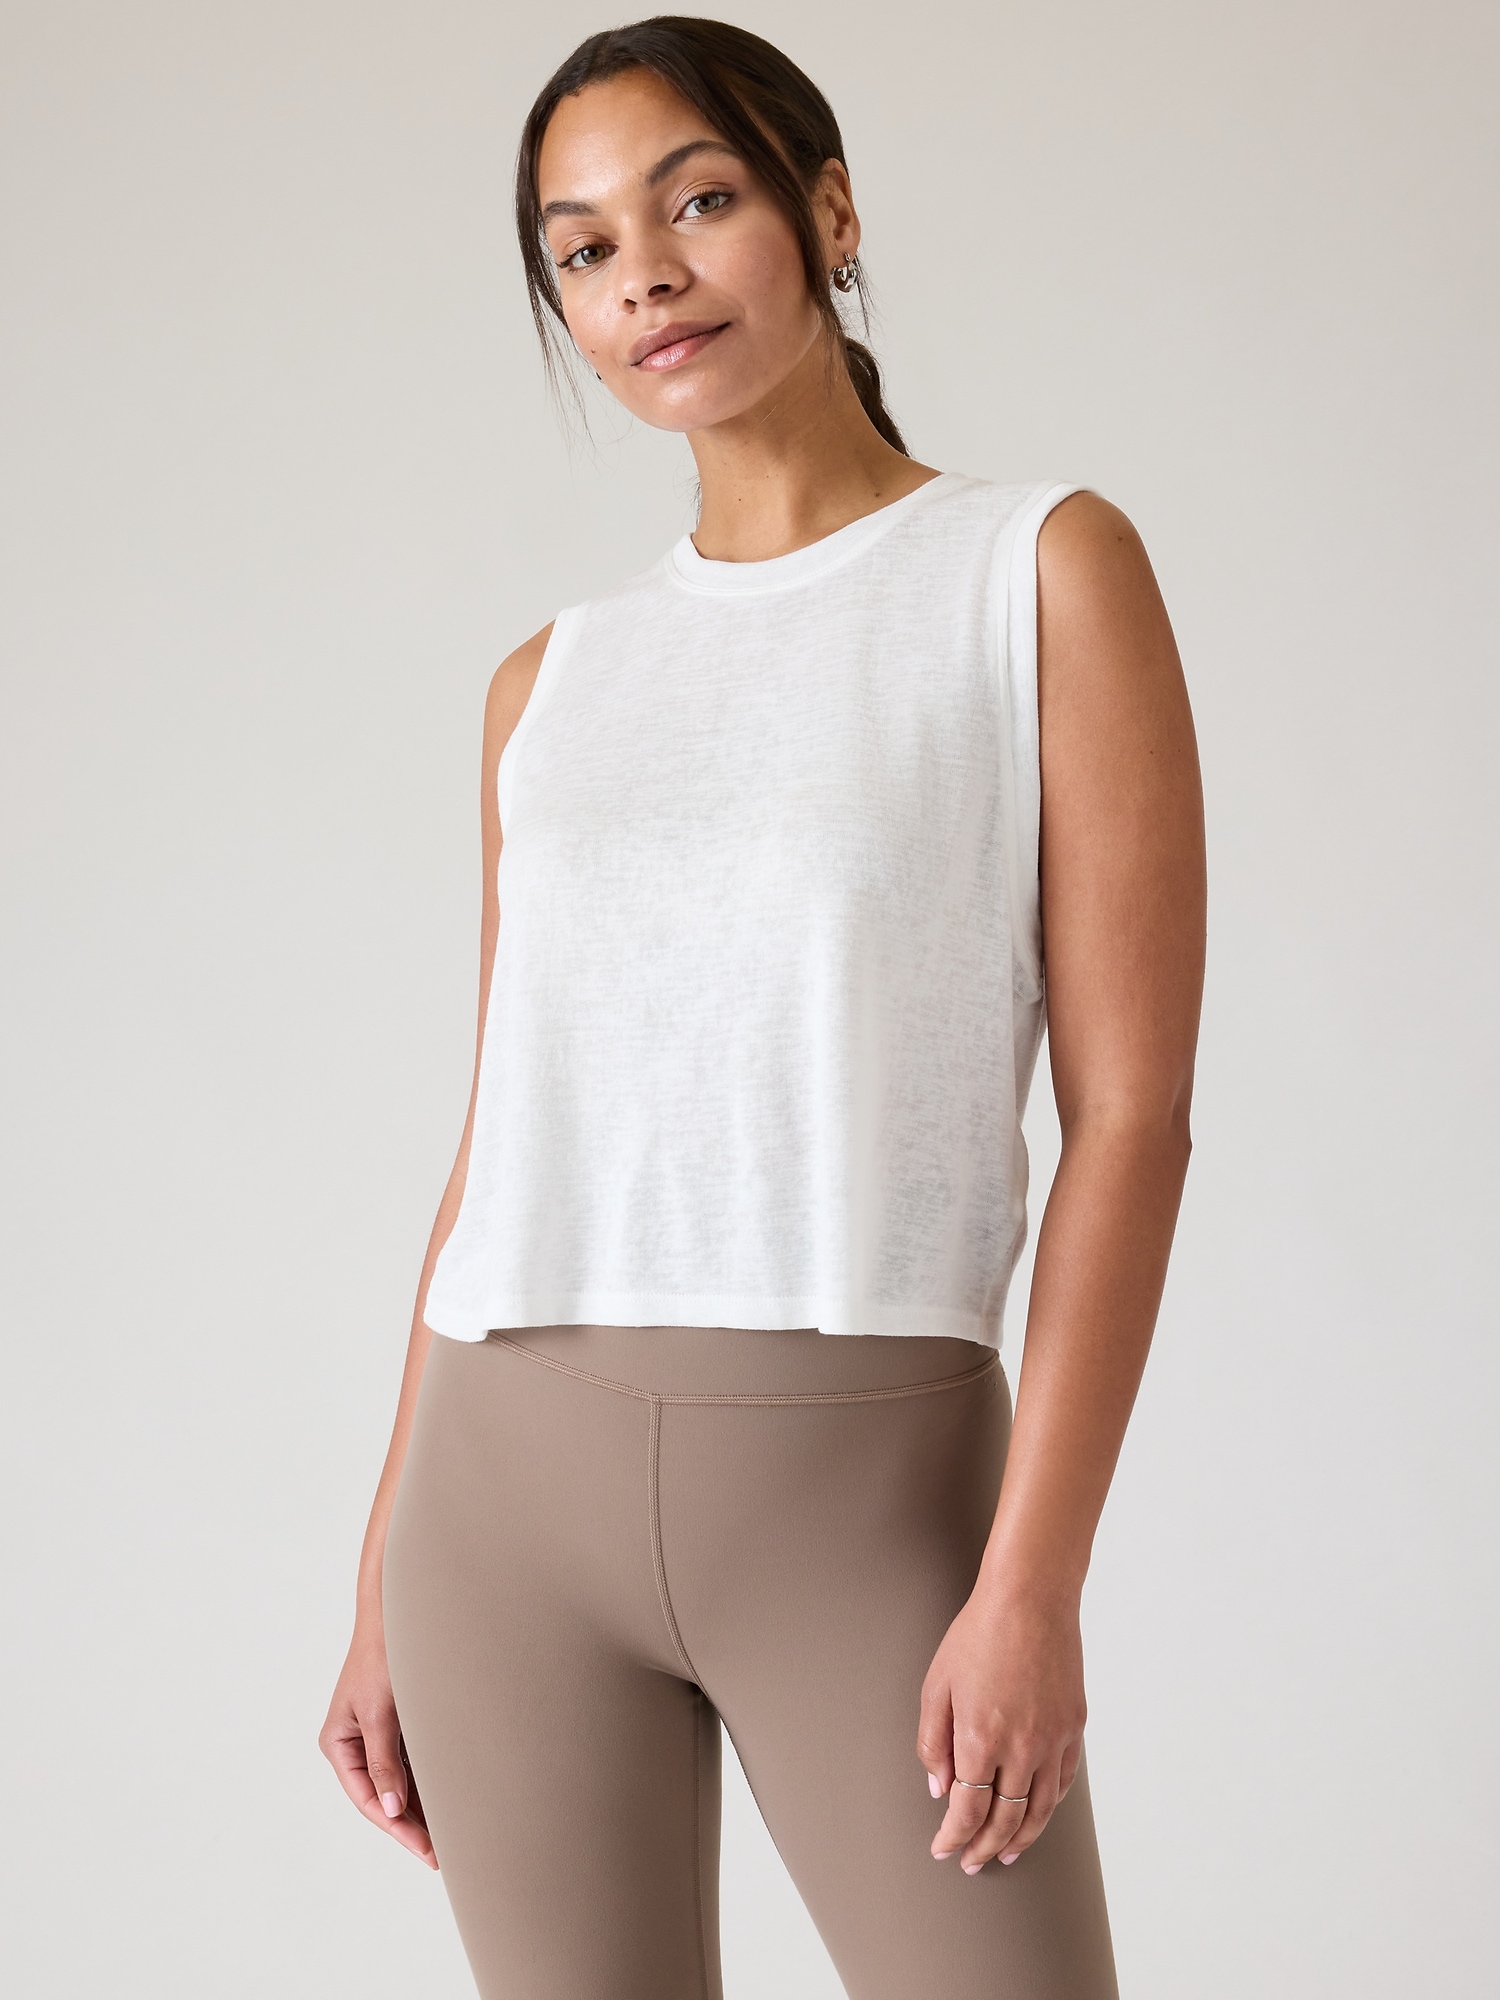 Athleta Breezy Muscle Tank In Bright White